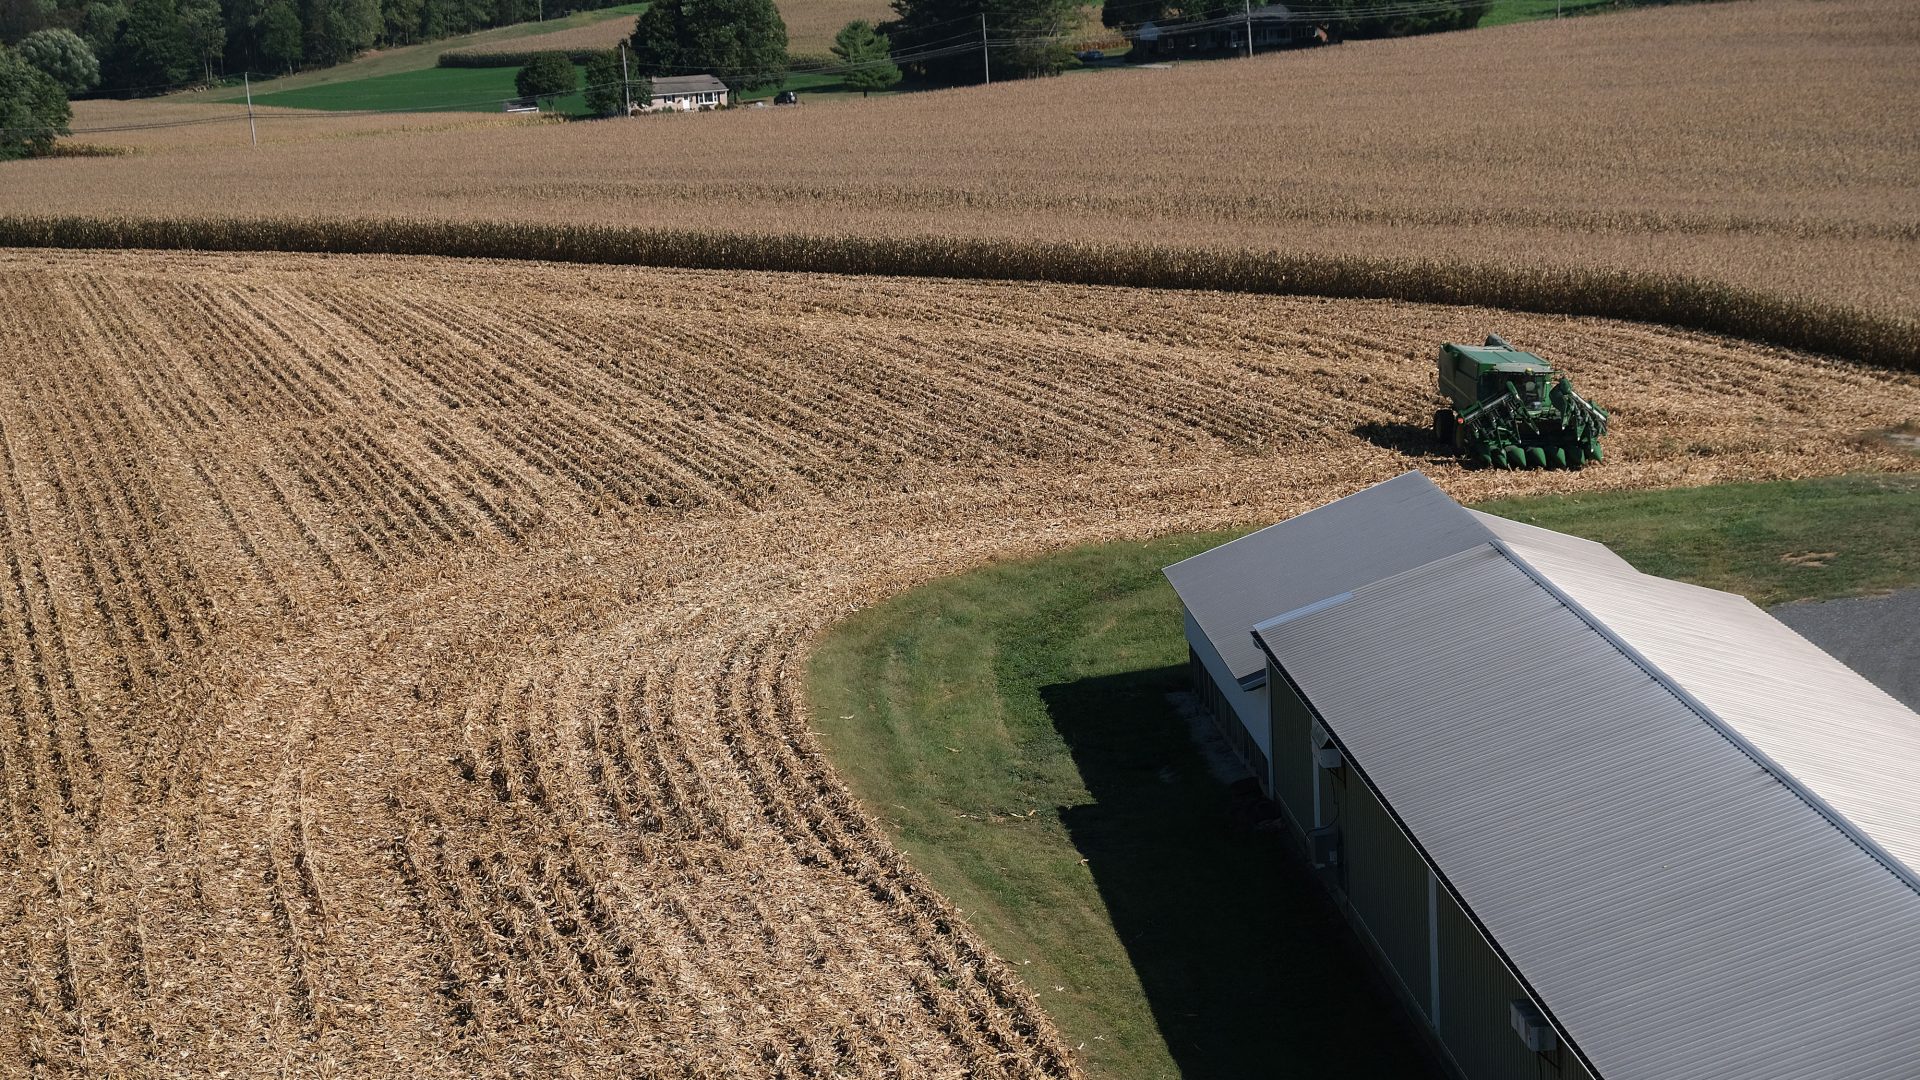 A look at the facility at Cairns Family Farm on Sept. 25, 2019, in Sadsbury Township, Pennsylvania.